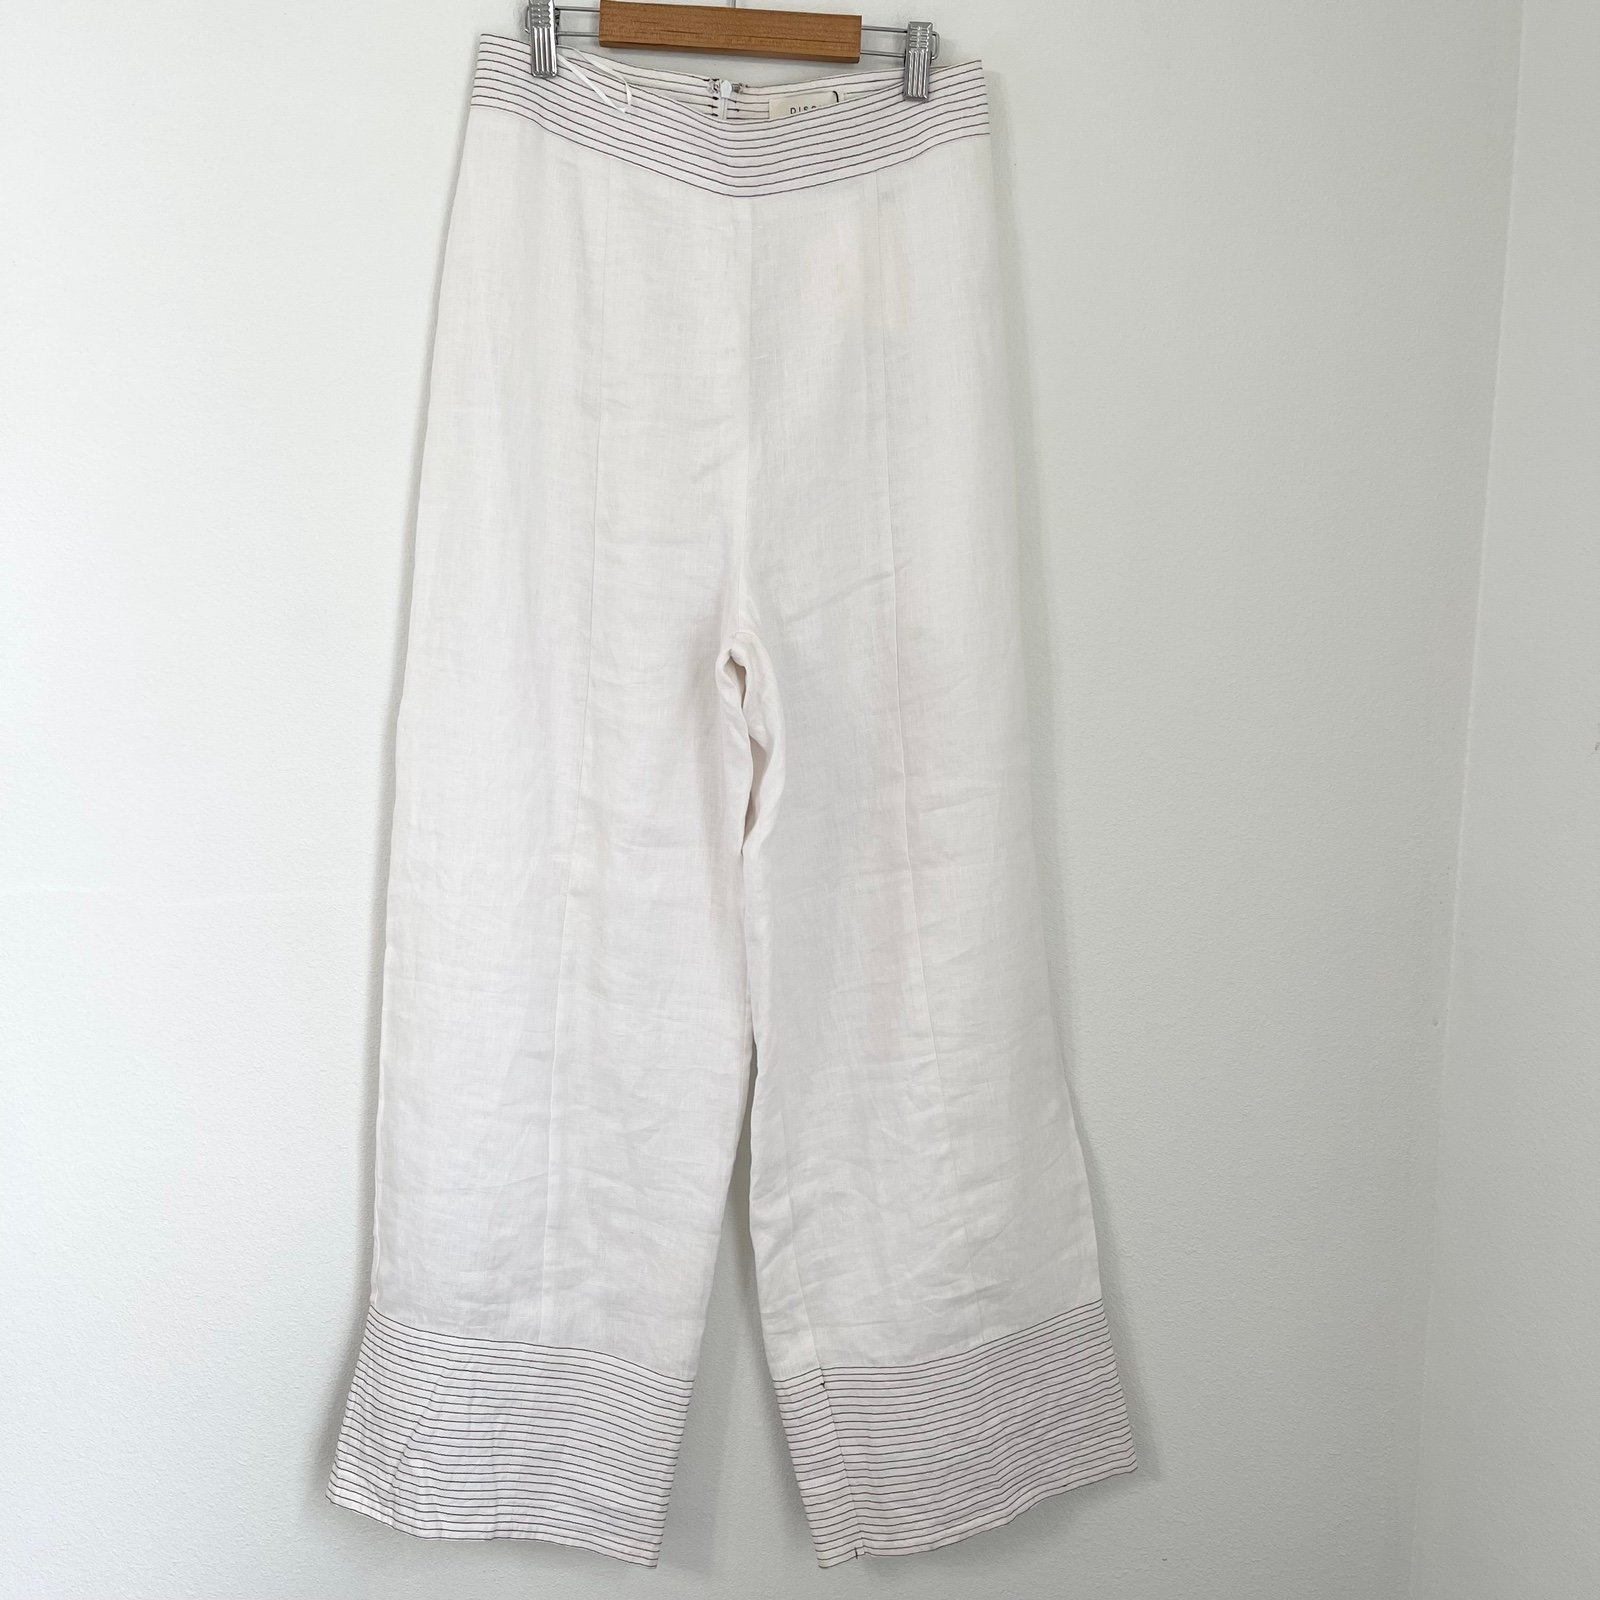 Great DISSH Chai White Linen Wide Leg Pants Back Zip Up Highwaisted Size 8 mLr6oZg5Y well sale